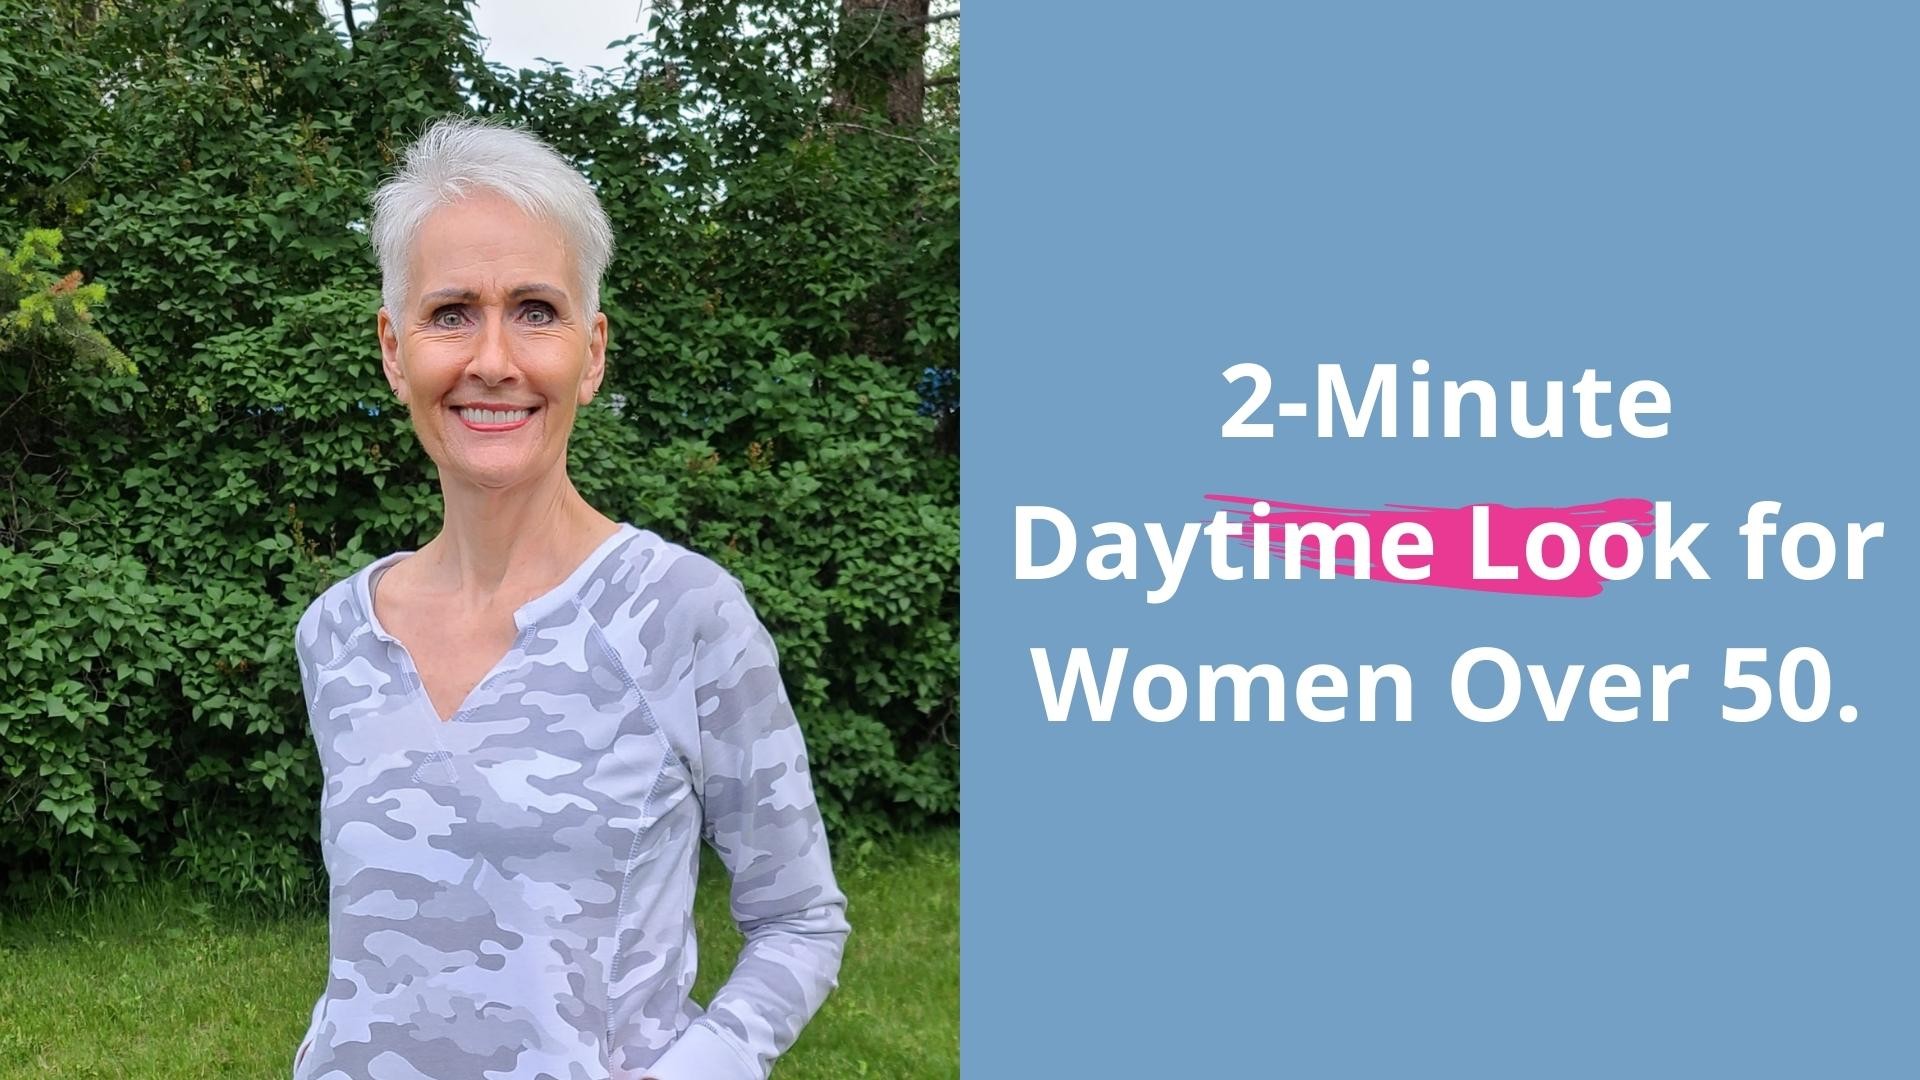 2-Minute Daytime Look for Women Over 50.